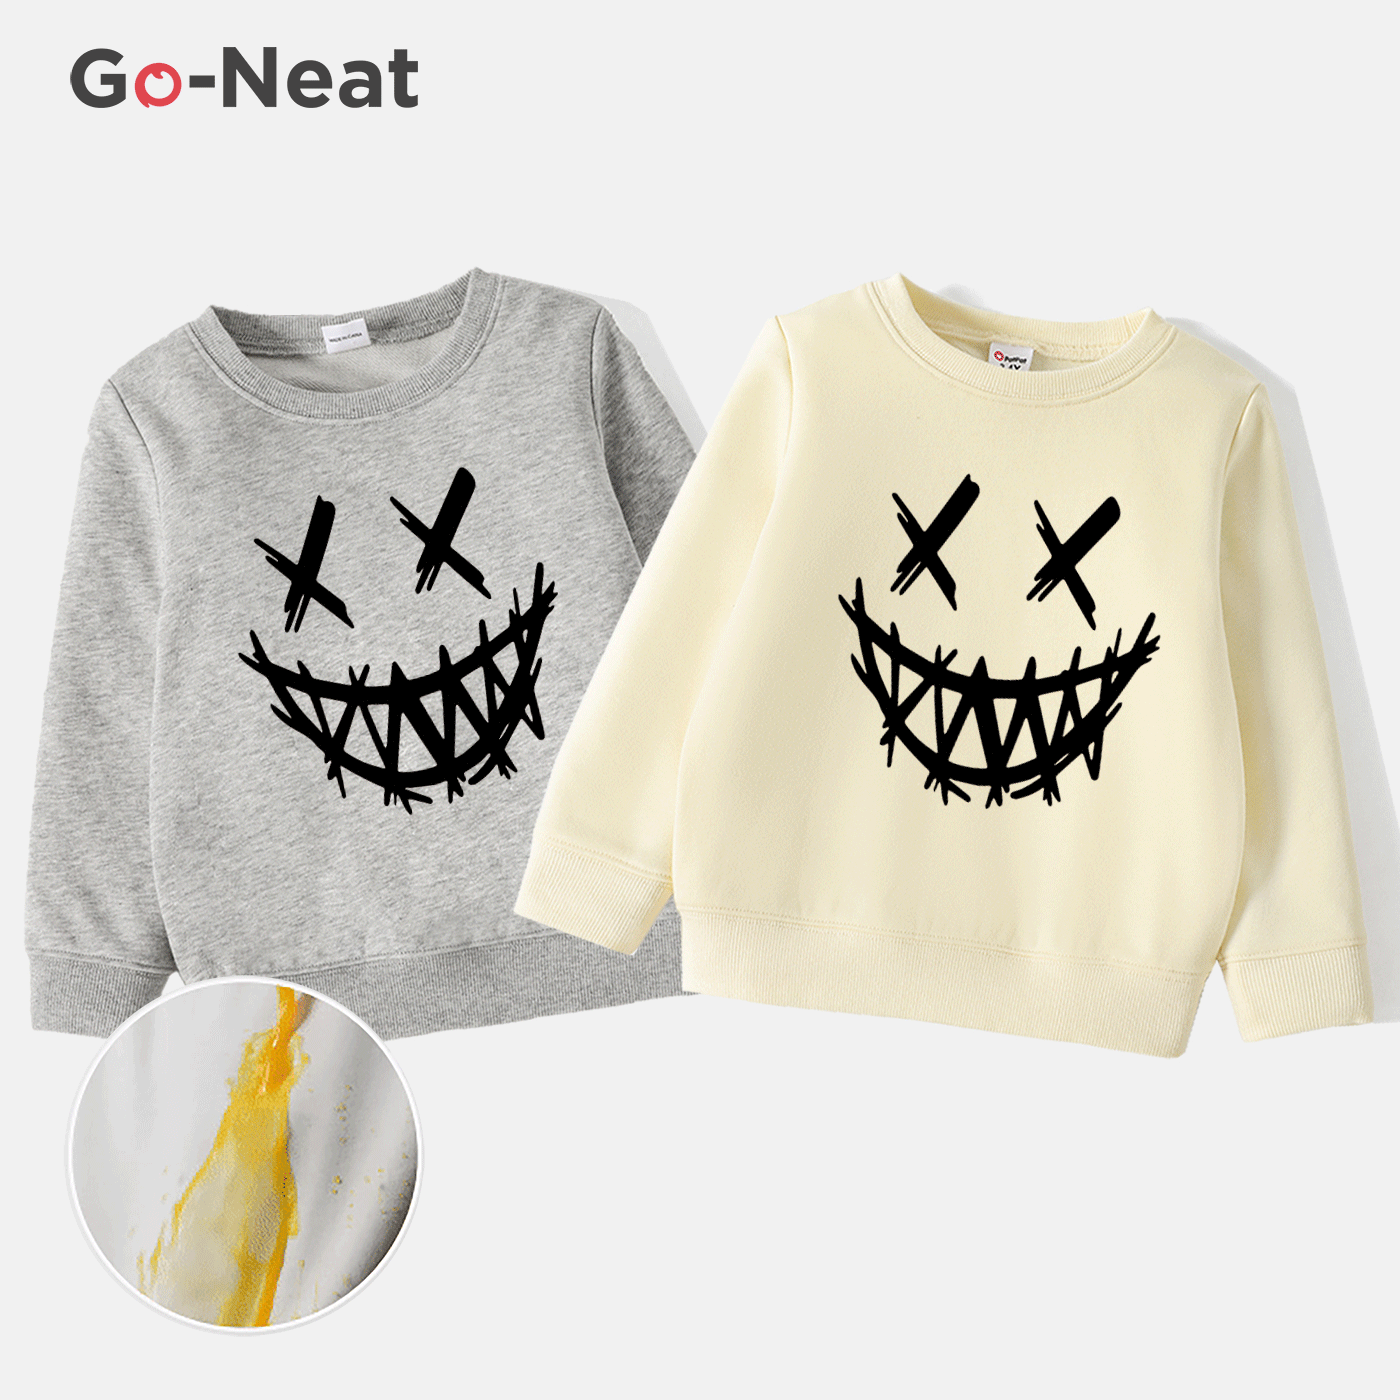 Go-Neat Water Repellent and Stain Resistant Sibling Matching Graphic Print Long-sleeve Sweatshirt Beige image 2